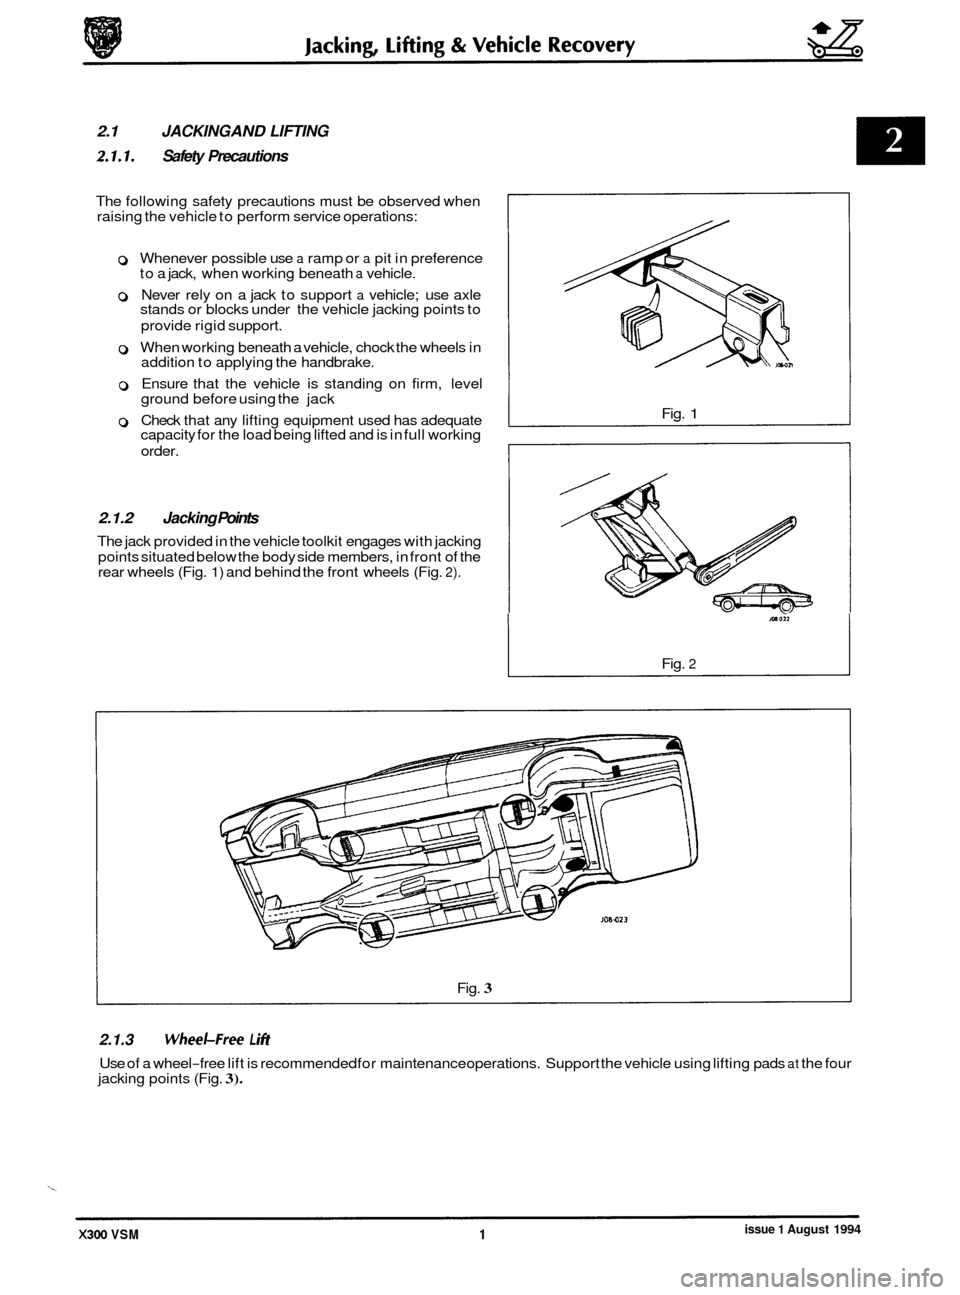 JAGUAR XJ6 1994 2.G Workshop Manual 0 2.1 JACKING AND LIFTING 
2.1.1. Safety Precautions 
The following  safety  precautions must  be observed  when 
raising the vehicle  to perform  service operations: 
0 Whenever  possible use a ramp 